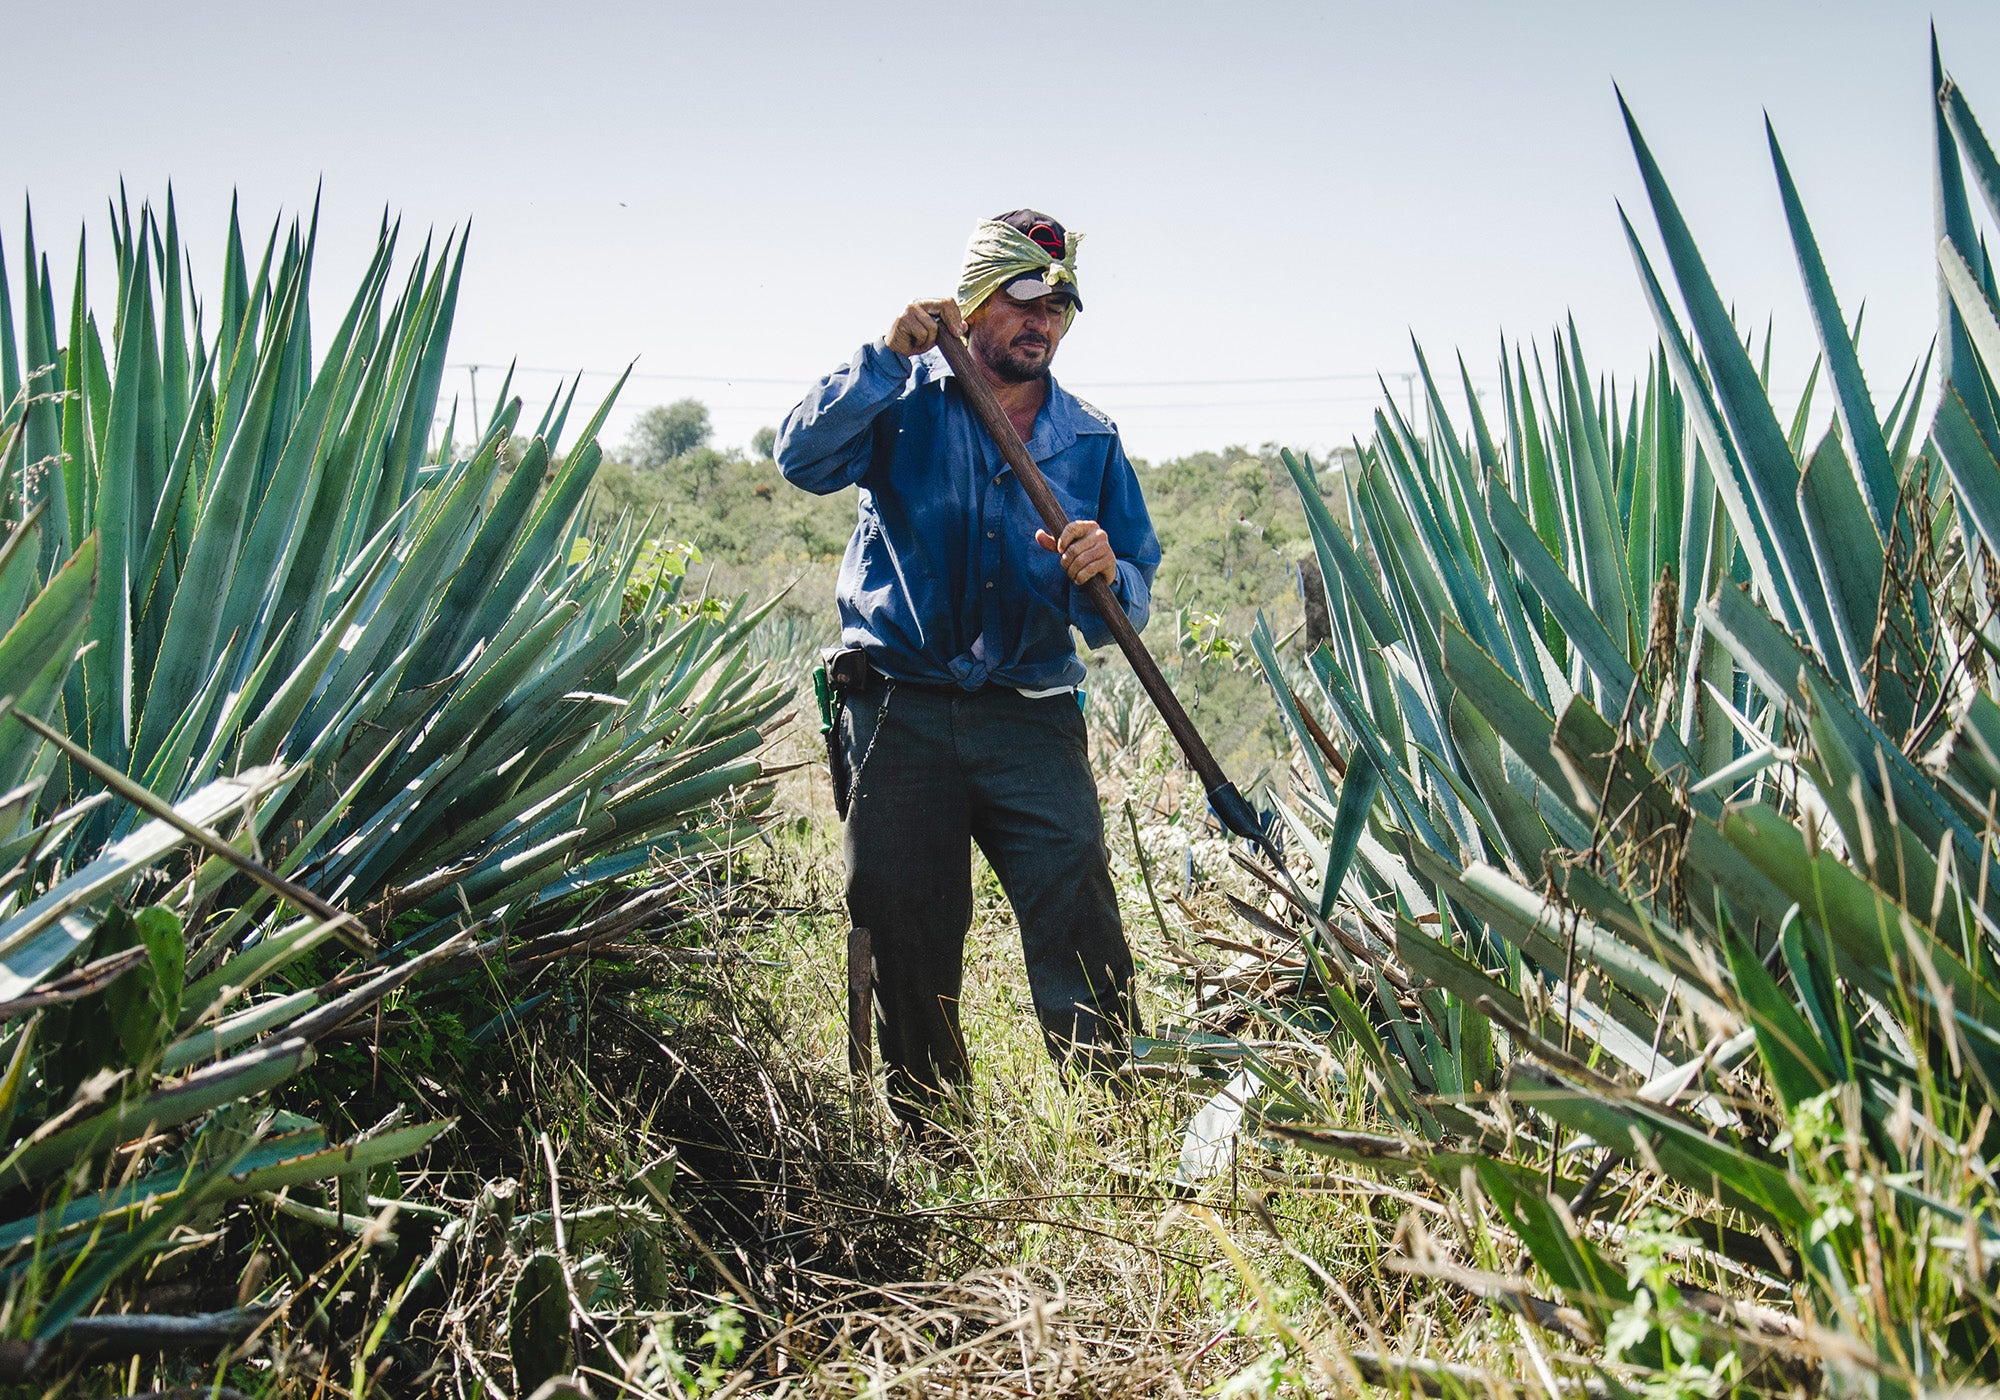 A jimador harvesting Agave crops at the Casa Maestri distillery in Jalisco, Mexico.